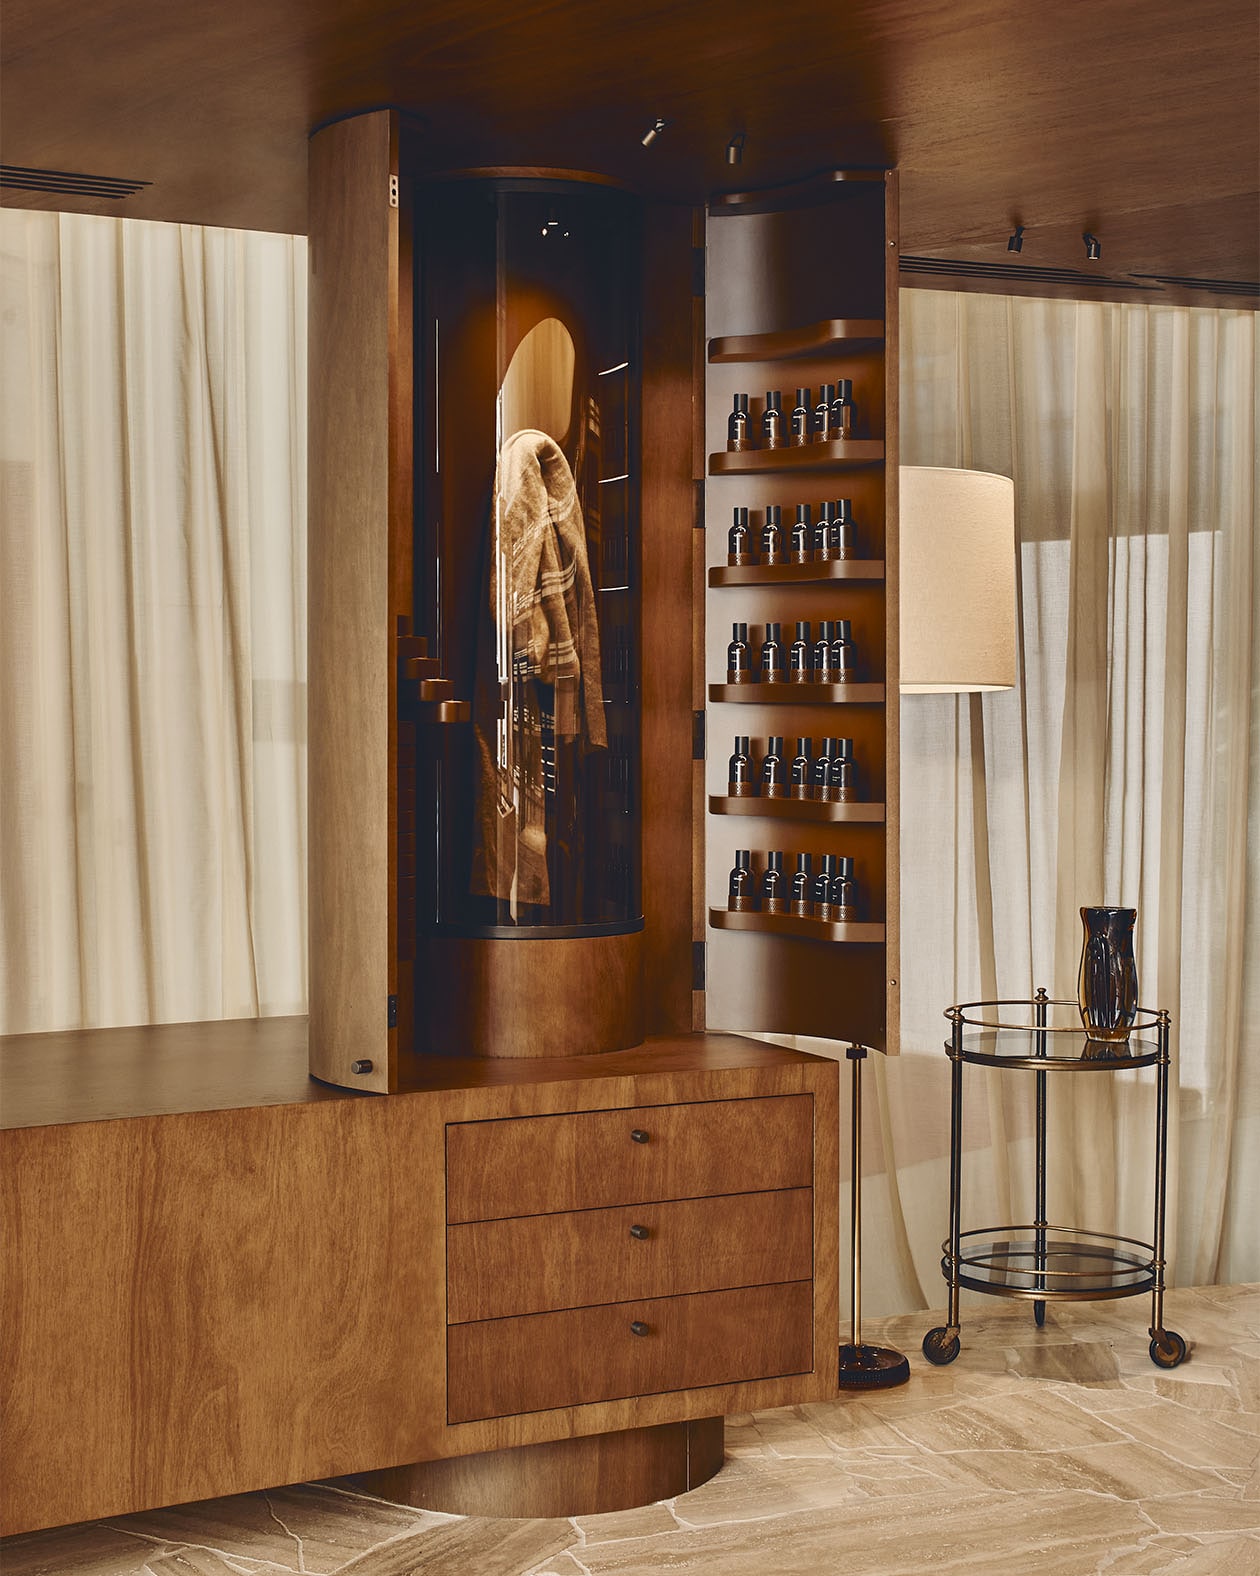 A Fragrance Armoire made from Australian Blackbutt timber displaying a collection of Aesop Fragrance bottles.